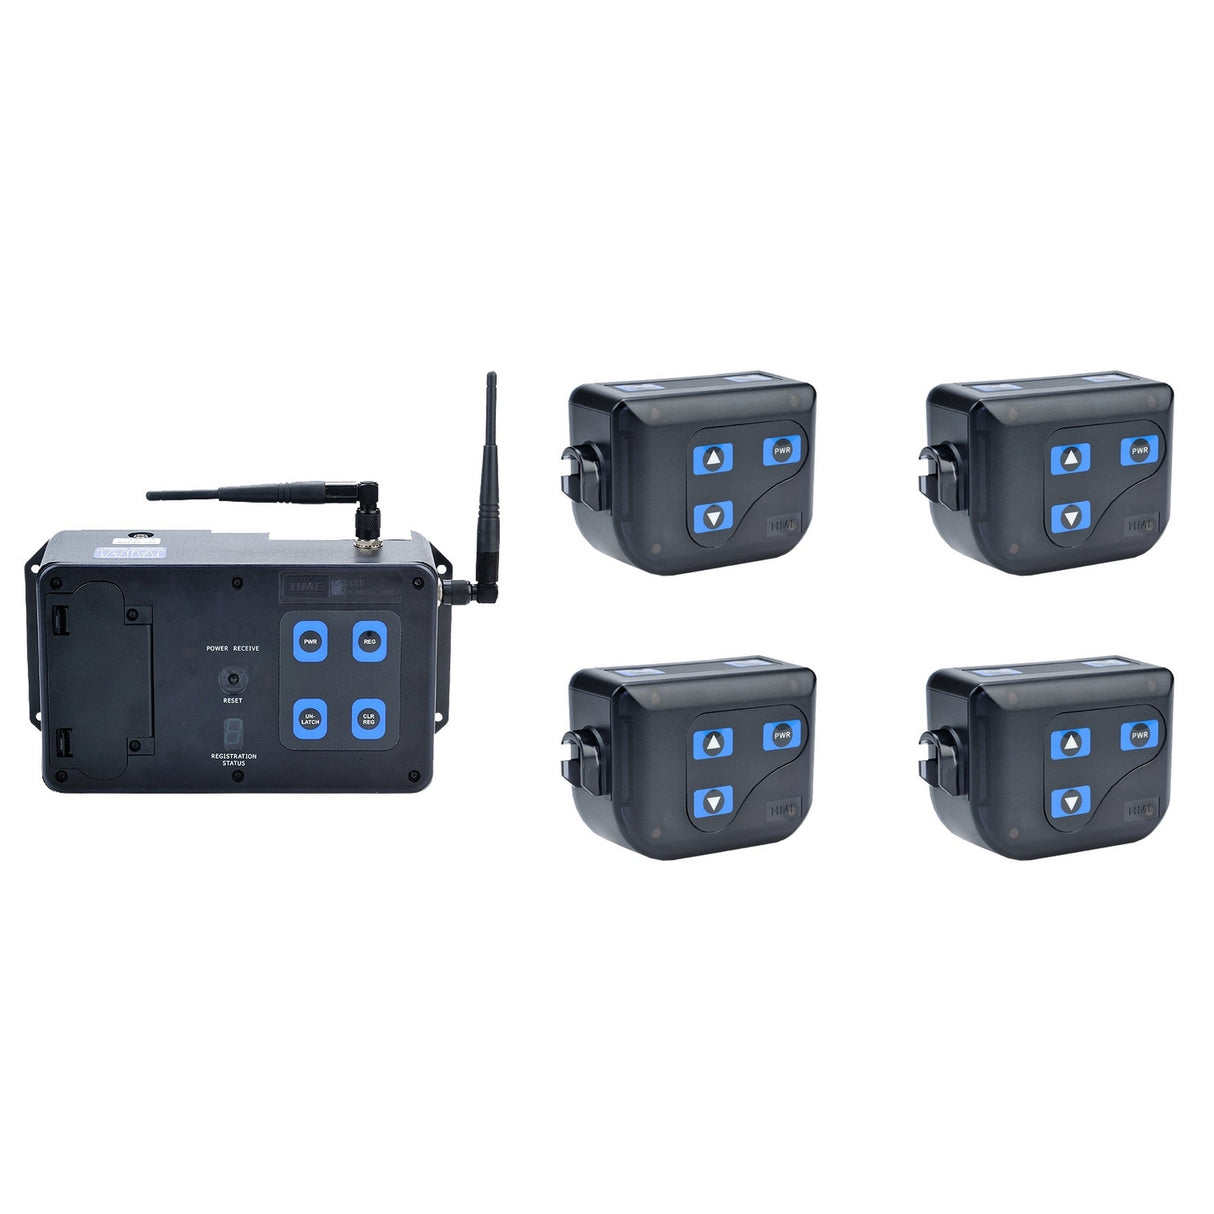 Clear-Com CZ11383 DX100 System with 4 Beltpacks for 4 User (Headset Not Included)